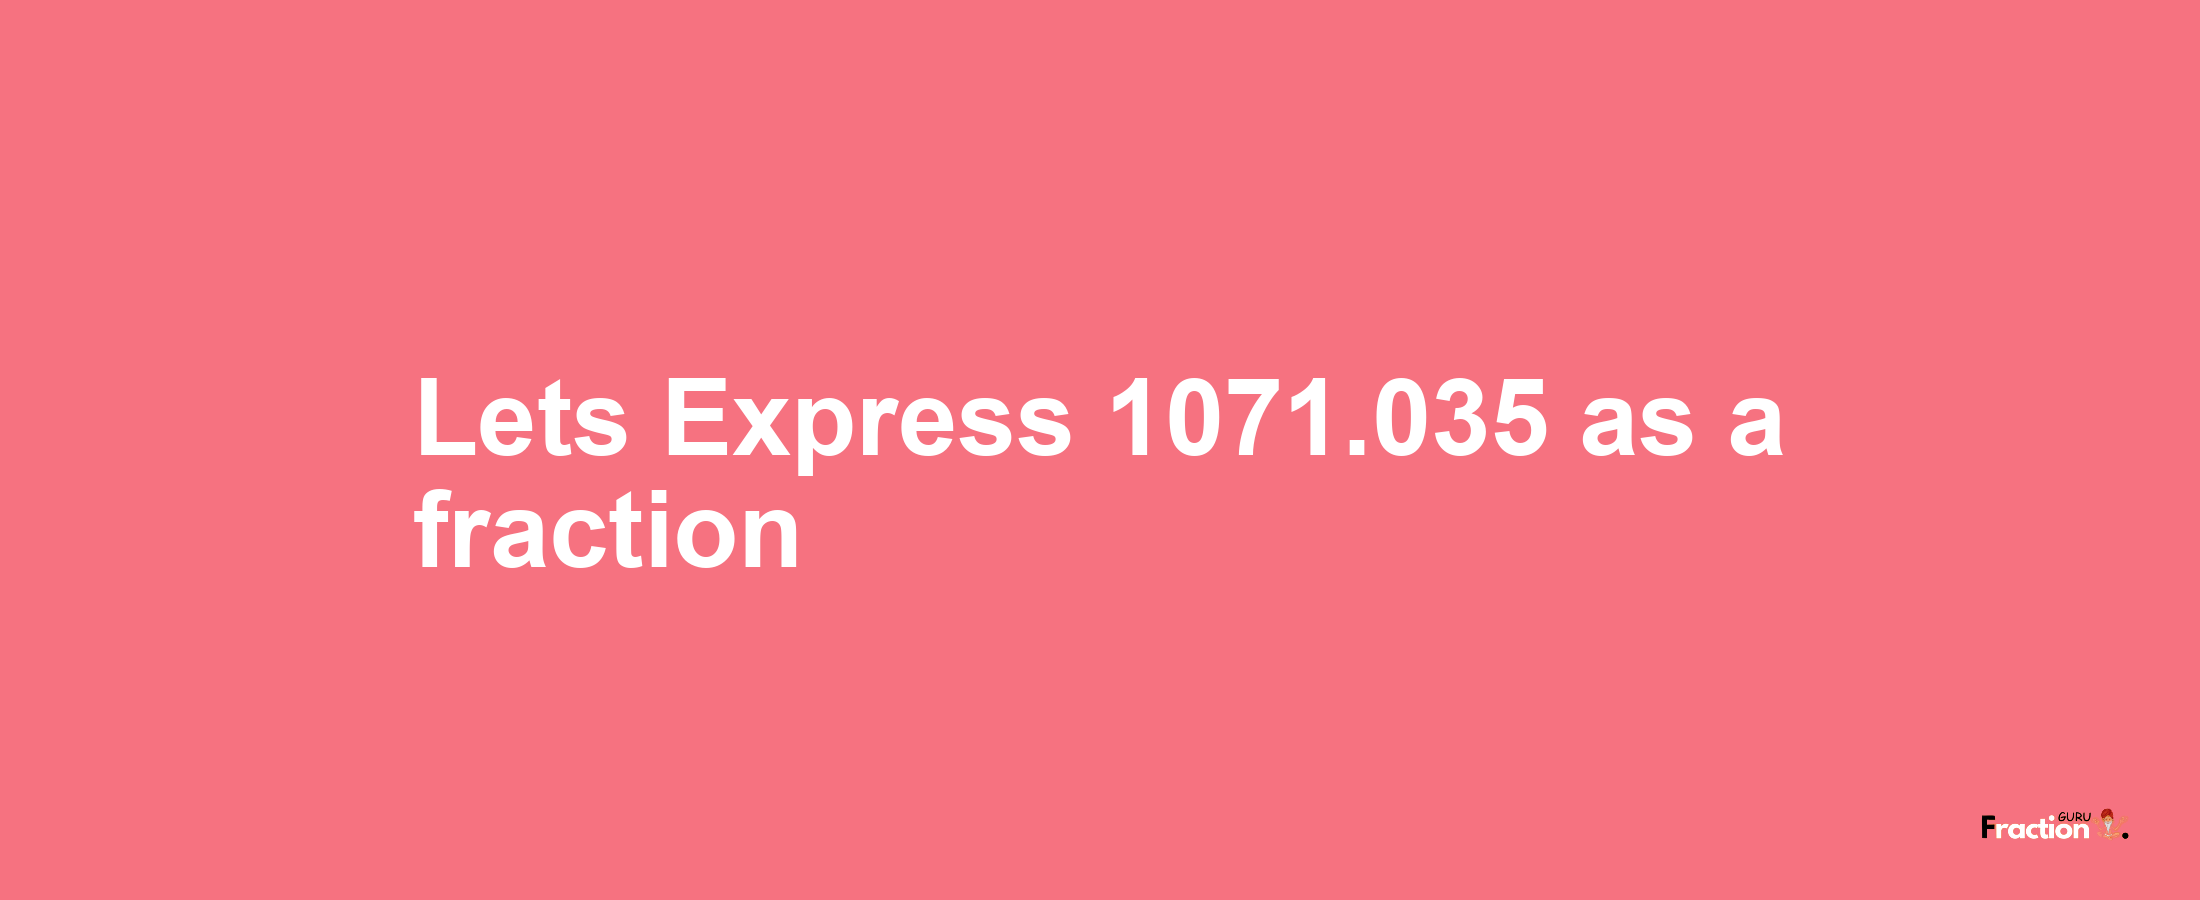 Lets Express 1071.035 as afraction